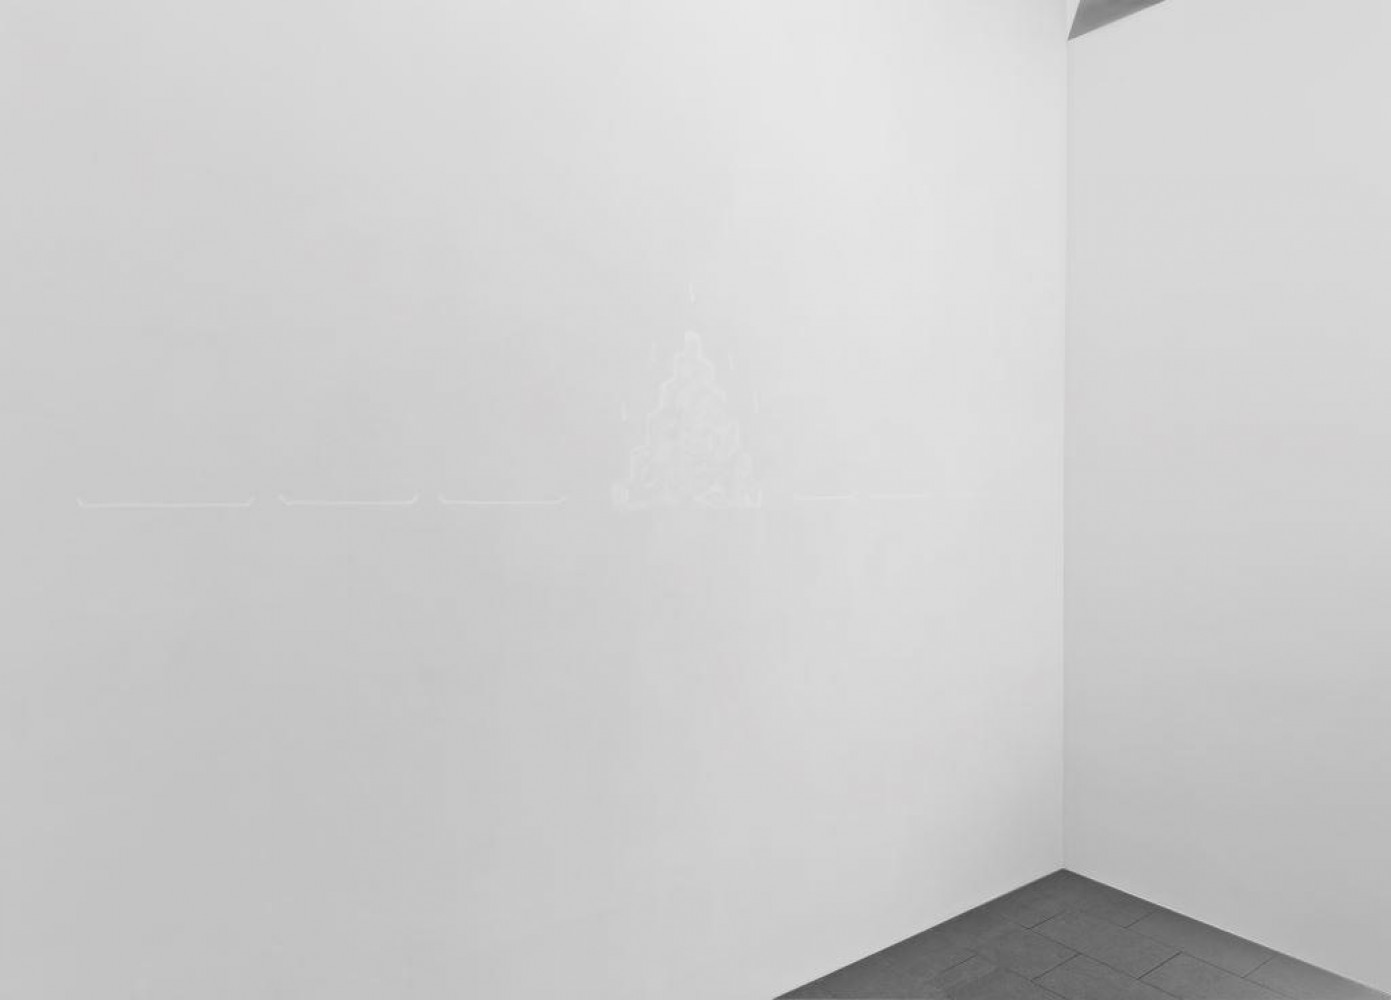 Wolfgang Laib, ‘The known and the unknown’, 2013, white pastel on white wall